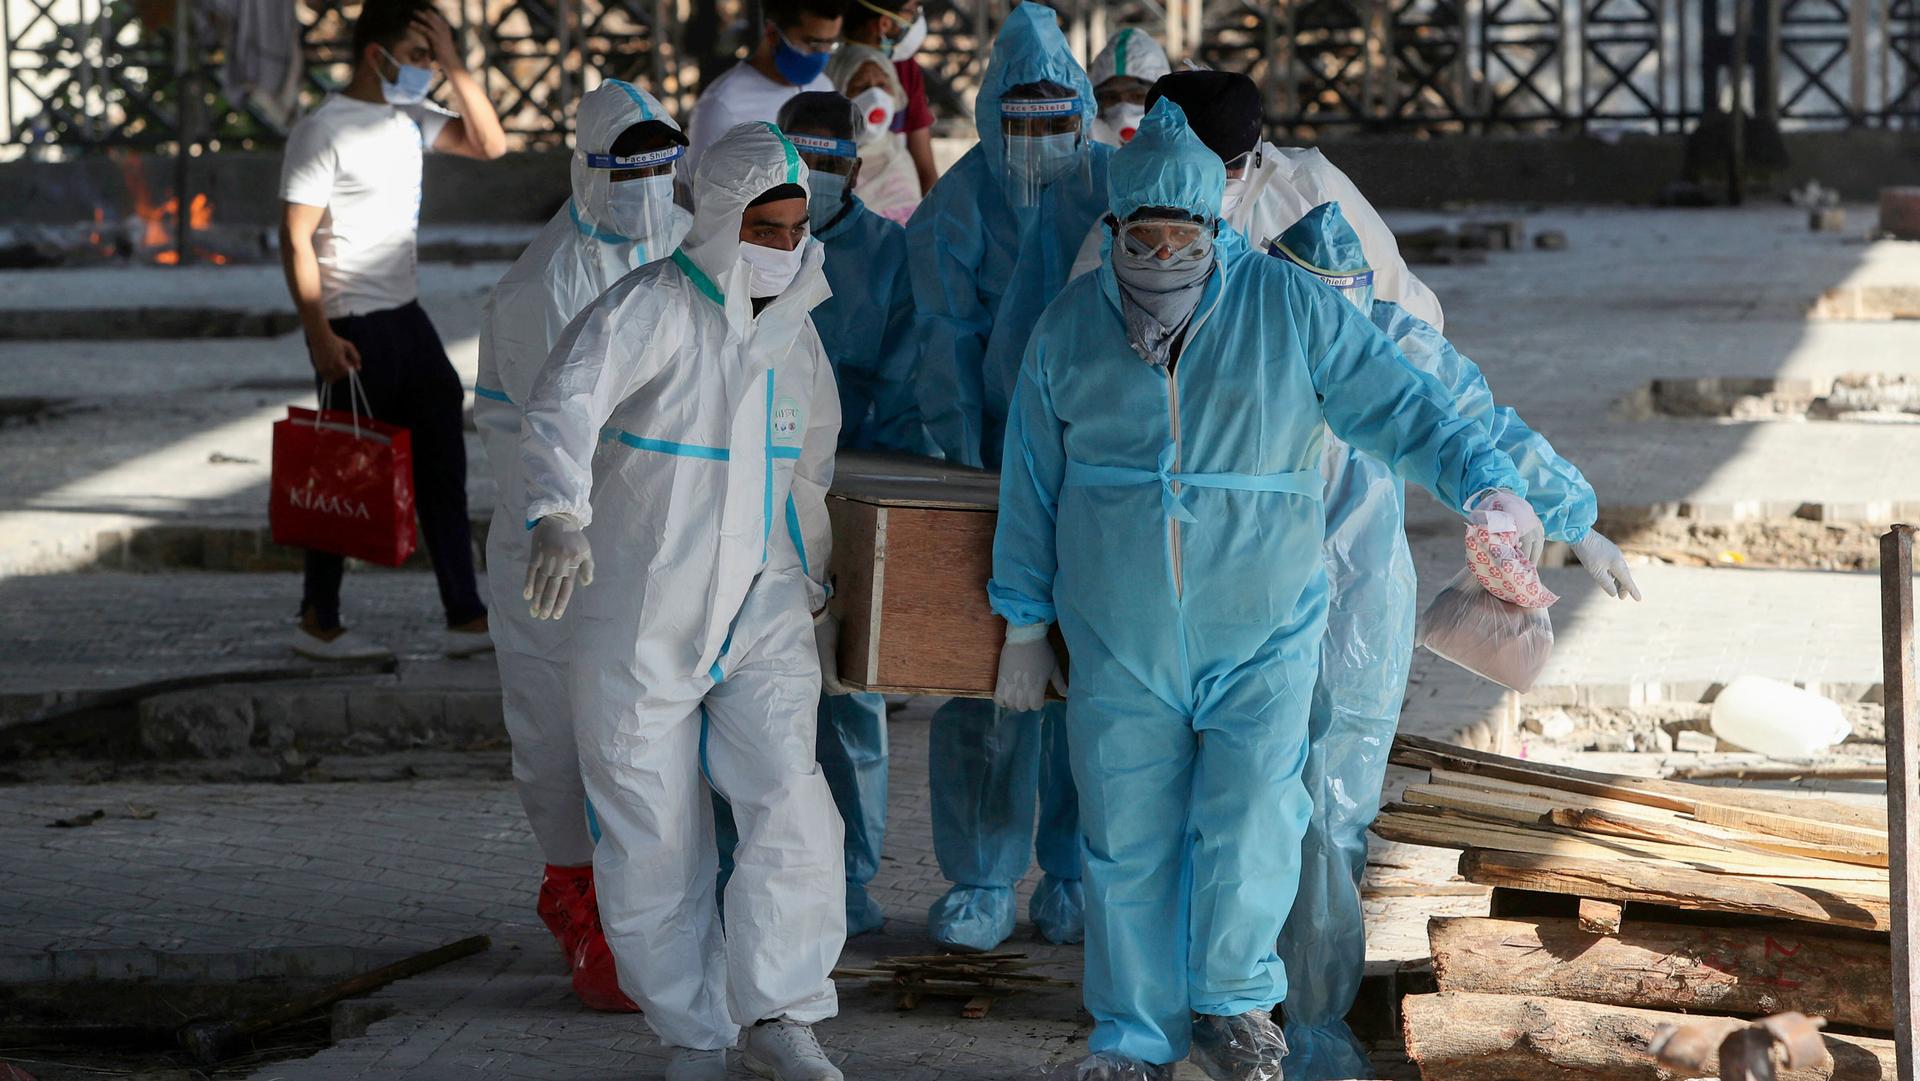 Several people are show wearing protective medical clothing and carrying a wooden casket.